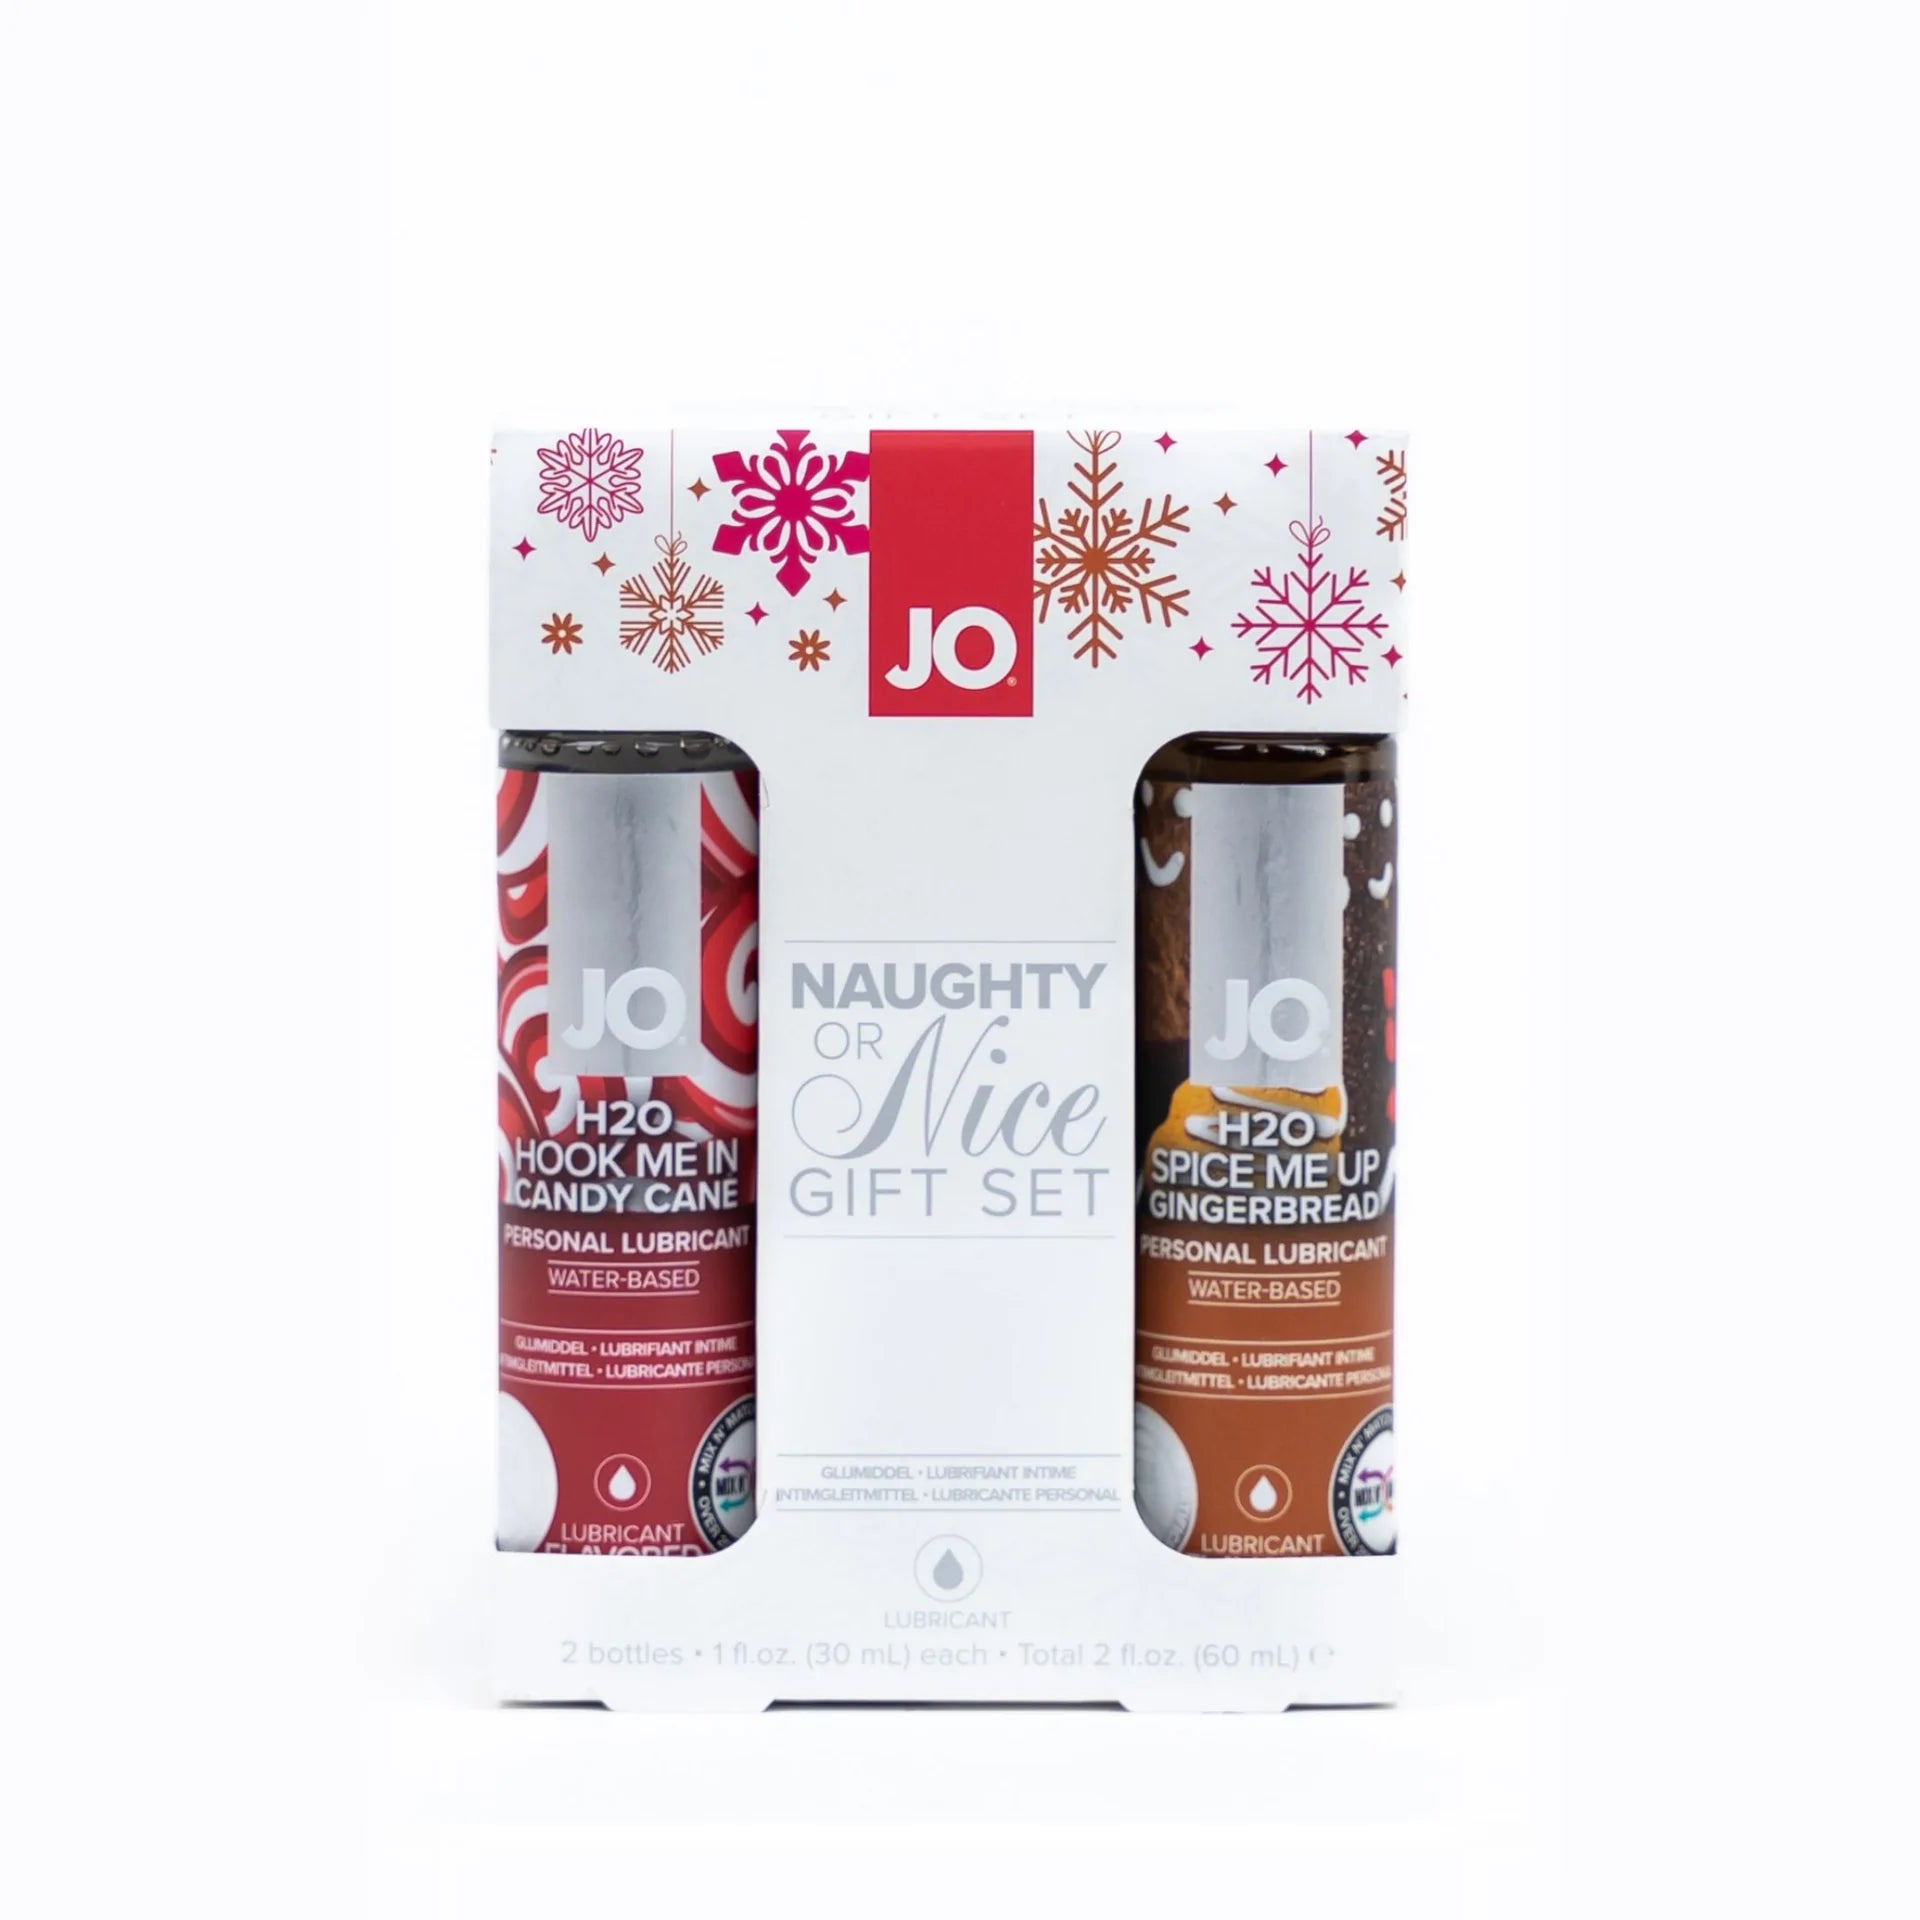 Naughty Or Nice Candy Cane/Gingerbread Flavored Water-Based Lube Gift Set - Rolik®